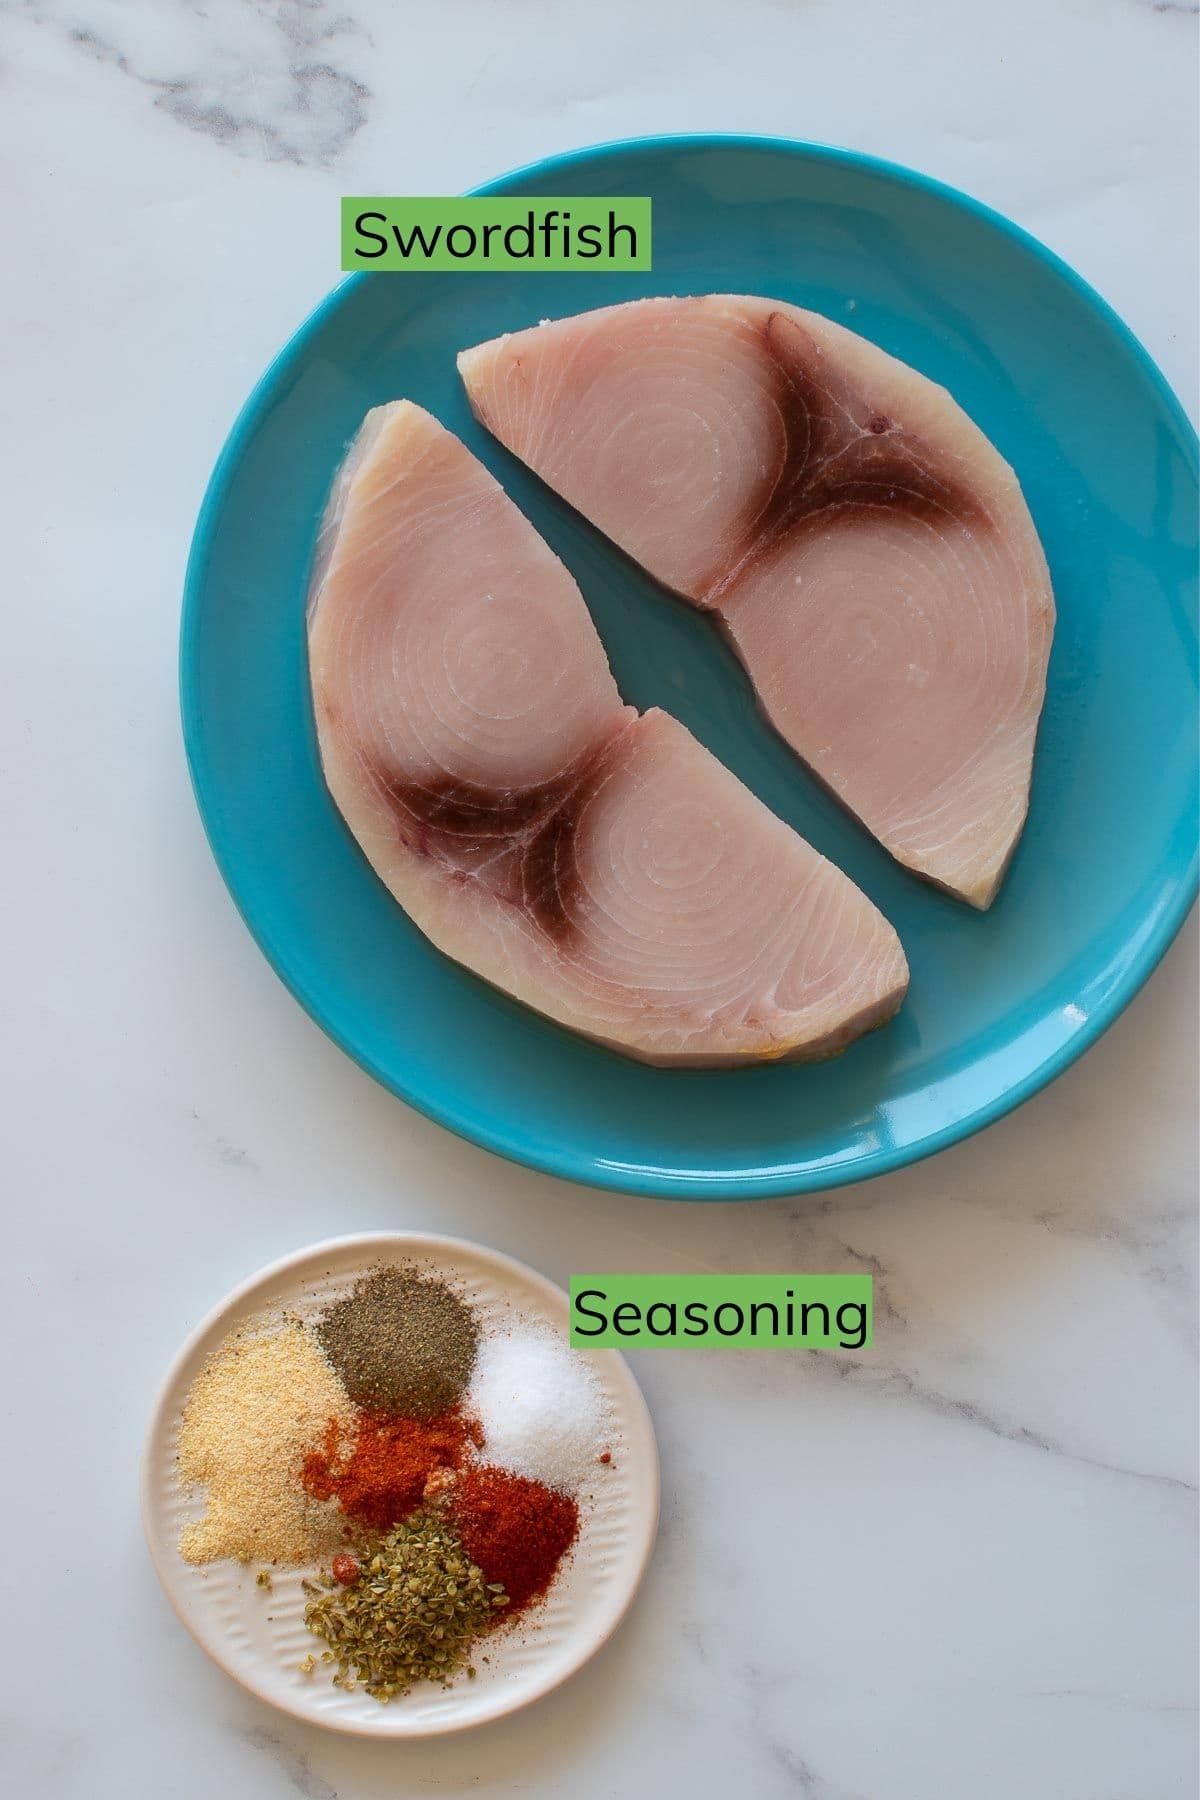 Raw swordfish fillets and seasoning laid out on a table.